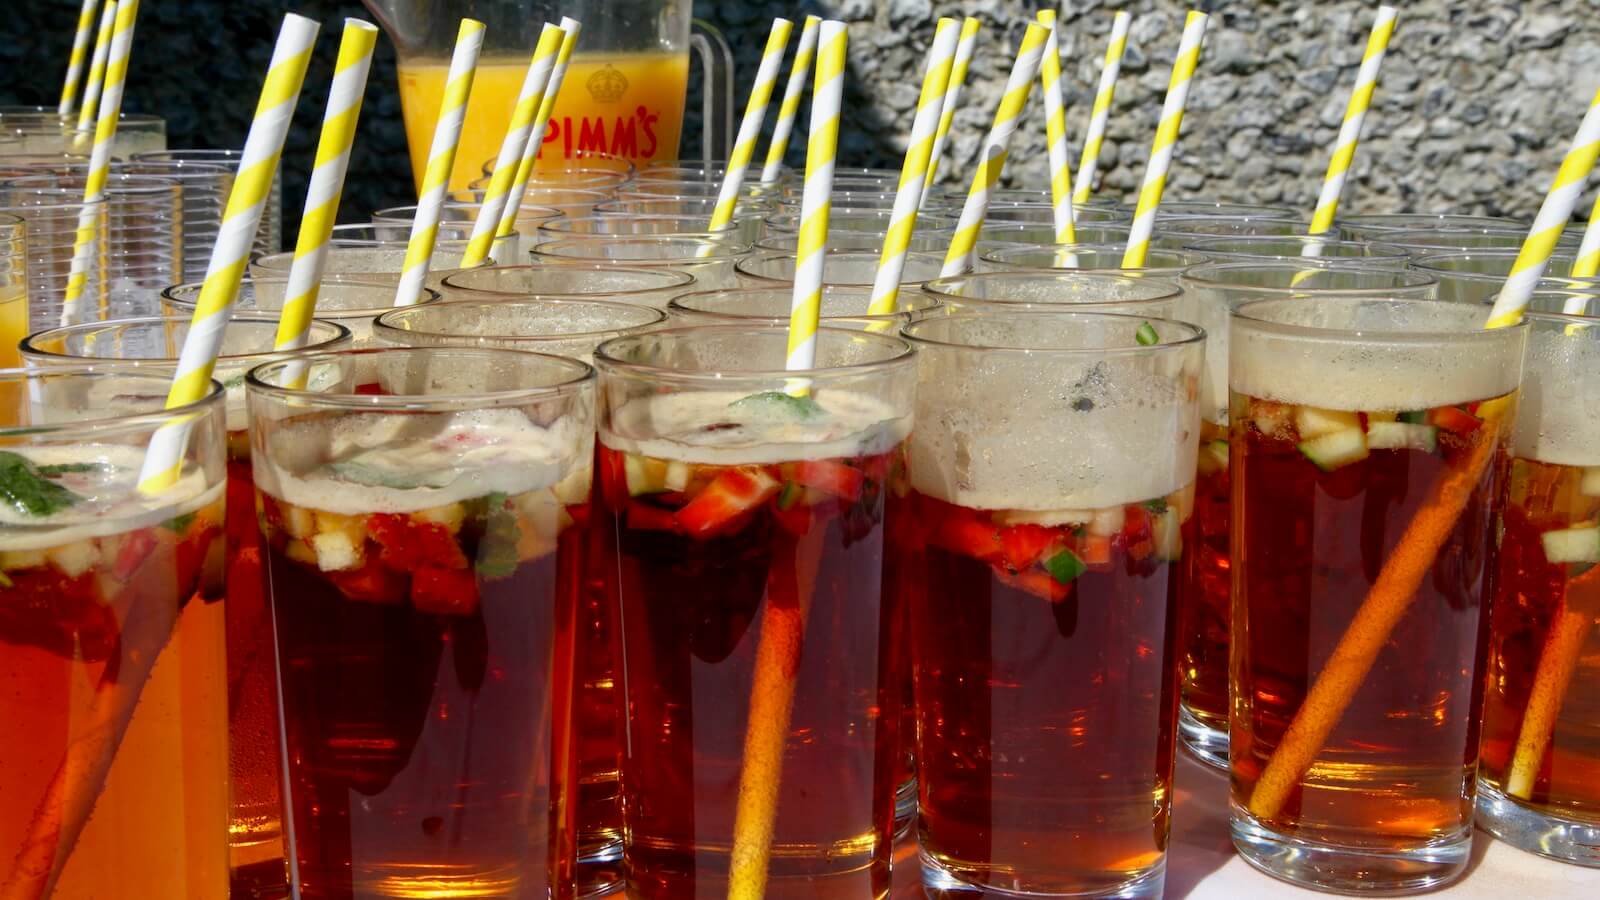 PIMMS time!